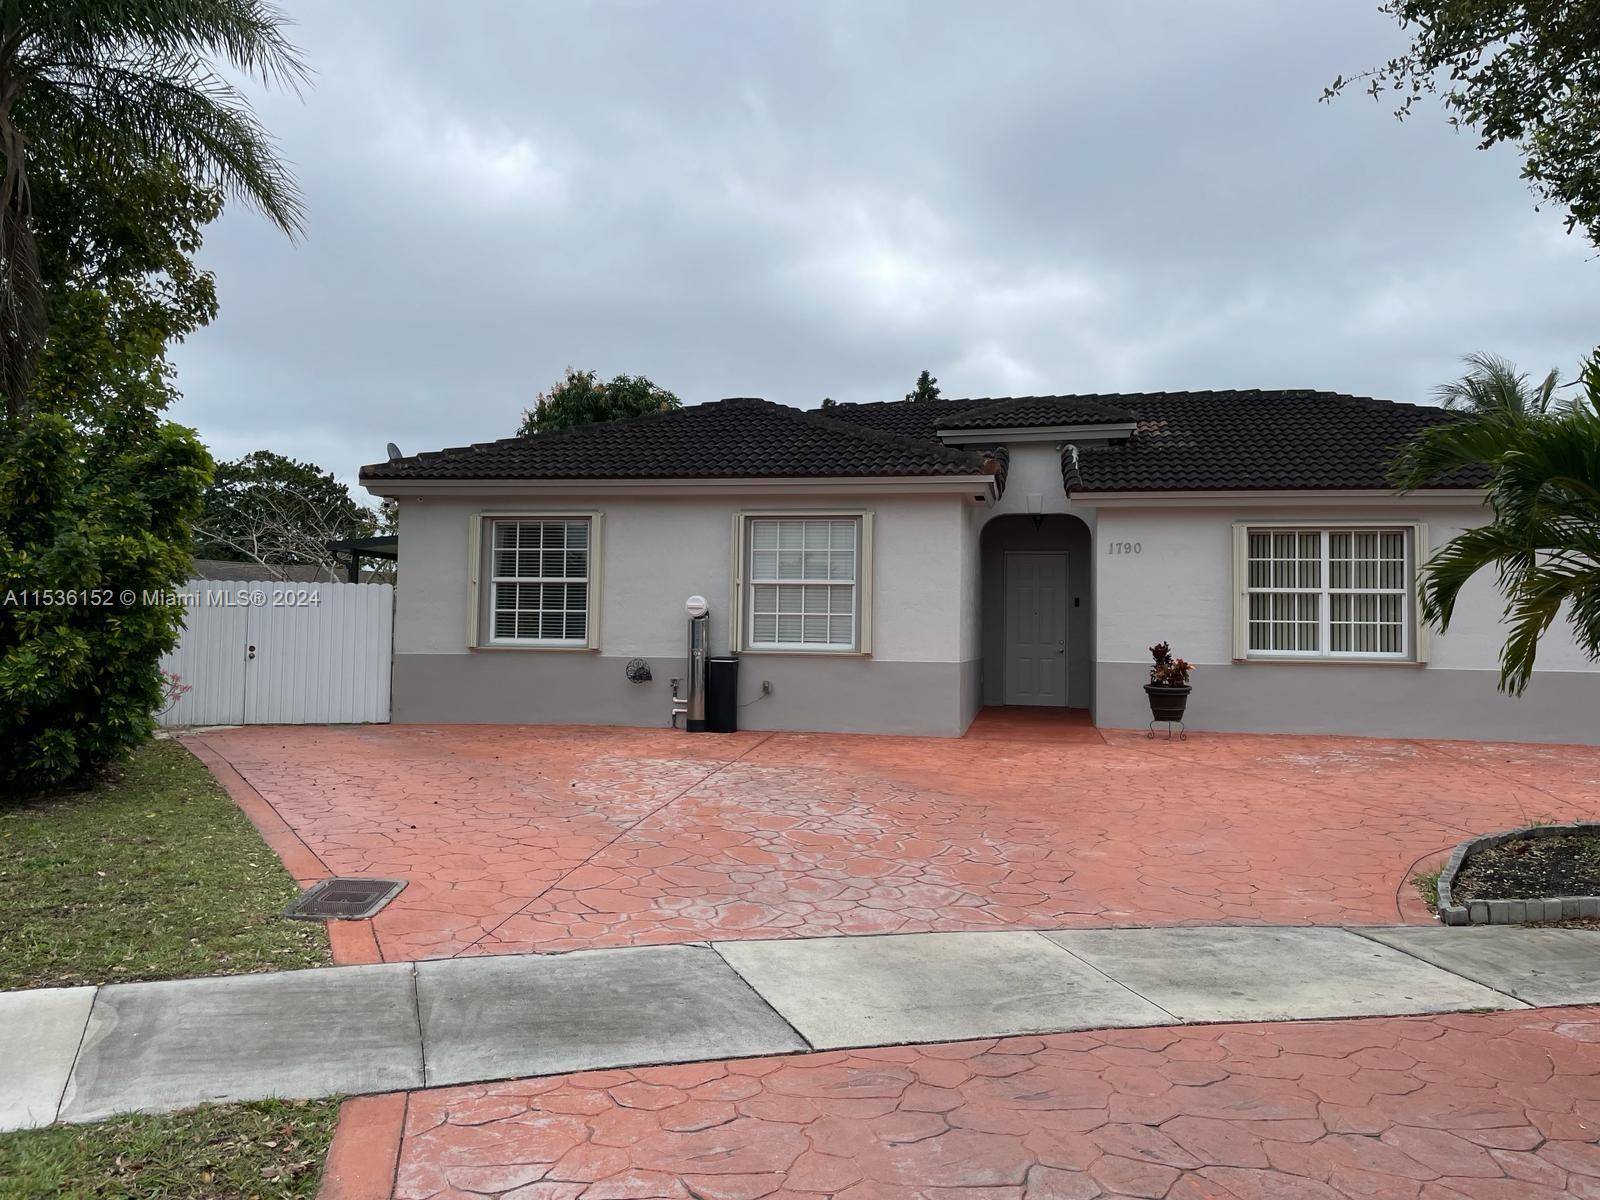 PRICE REDUCTION in this Immaculate single family home with 4 bedrooms 3 bathrooms, a large lot over 8000 square feet fenced with aluminum's panels, modern 24x48 porcelain tile, elegantly remodeled ...